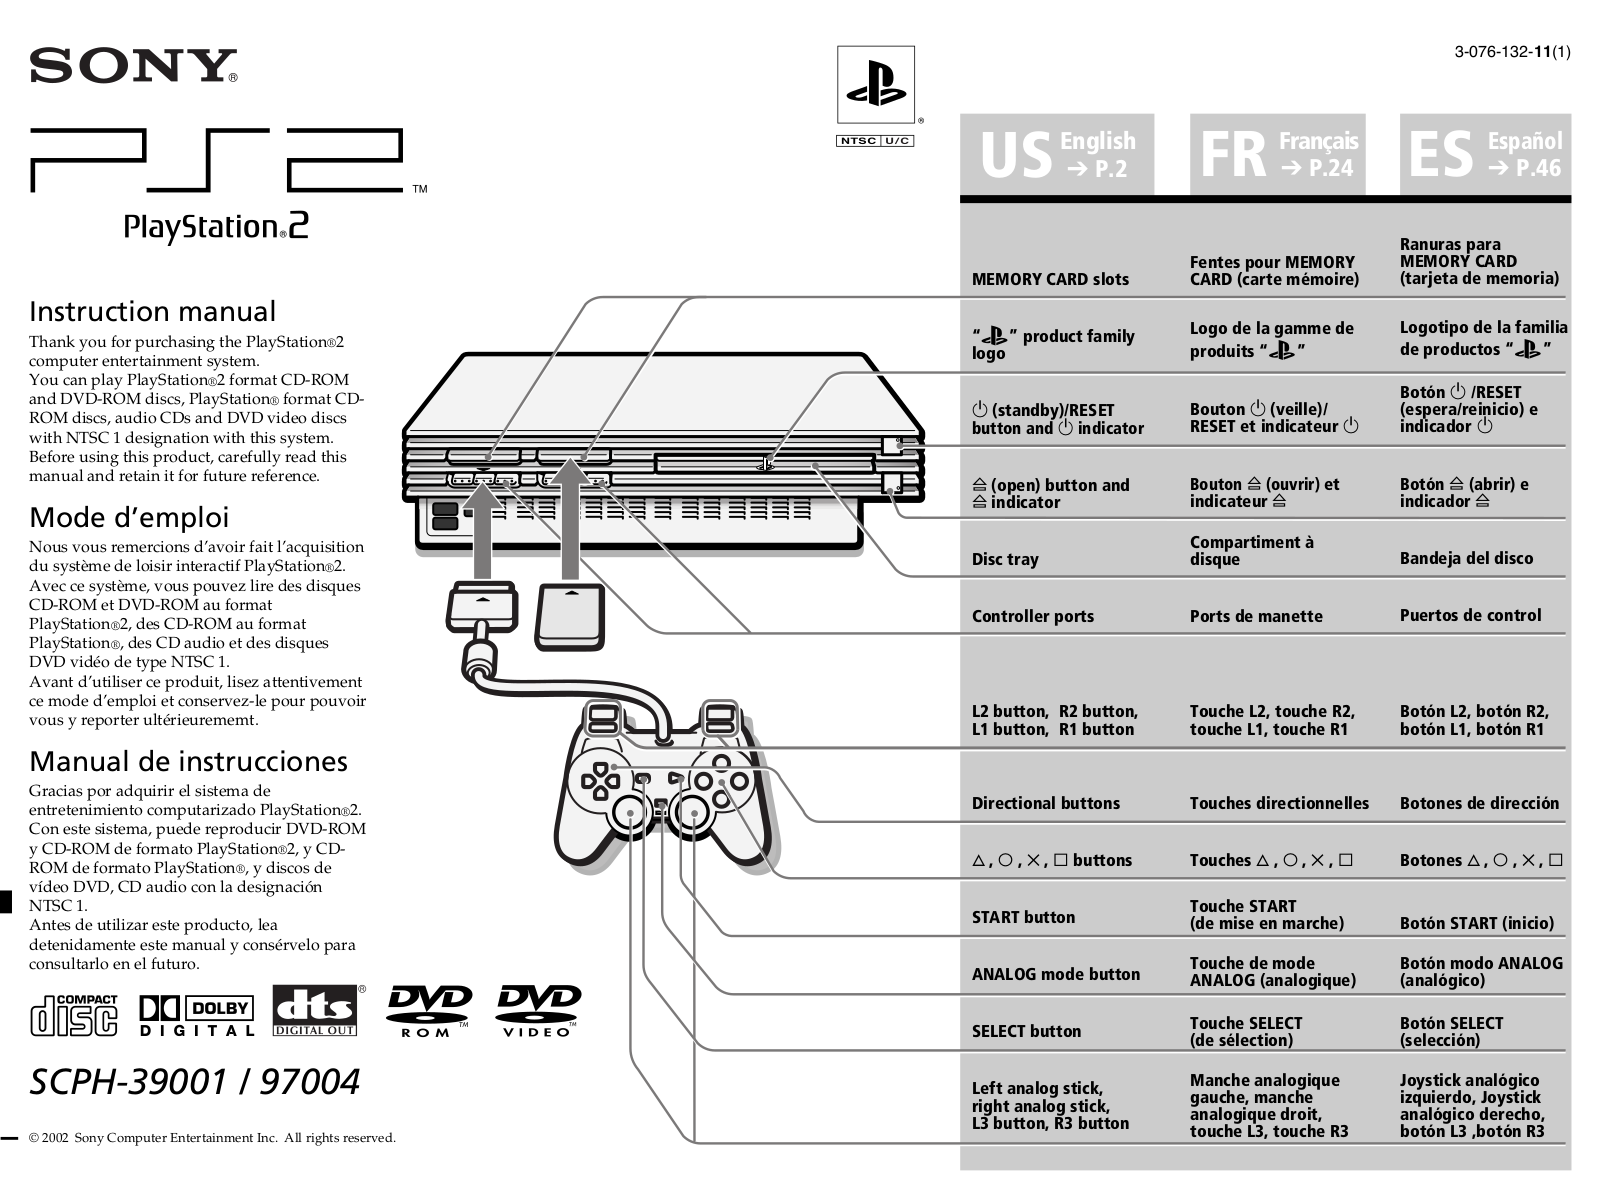 Sony SCPH-39001, SCPH-97004 User Manual